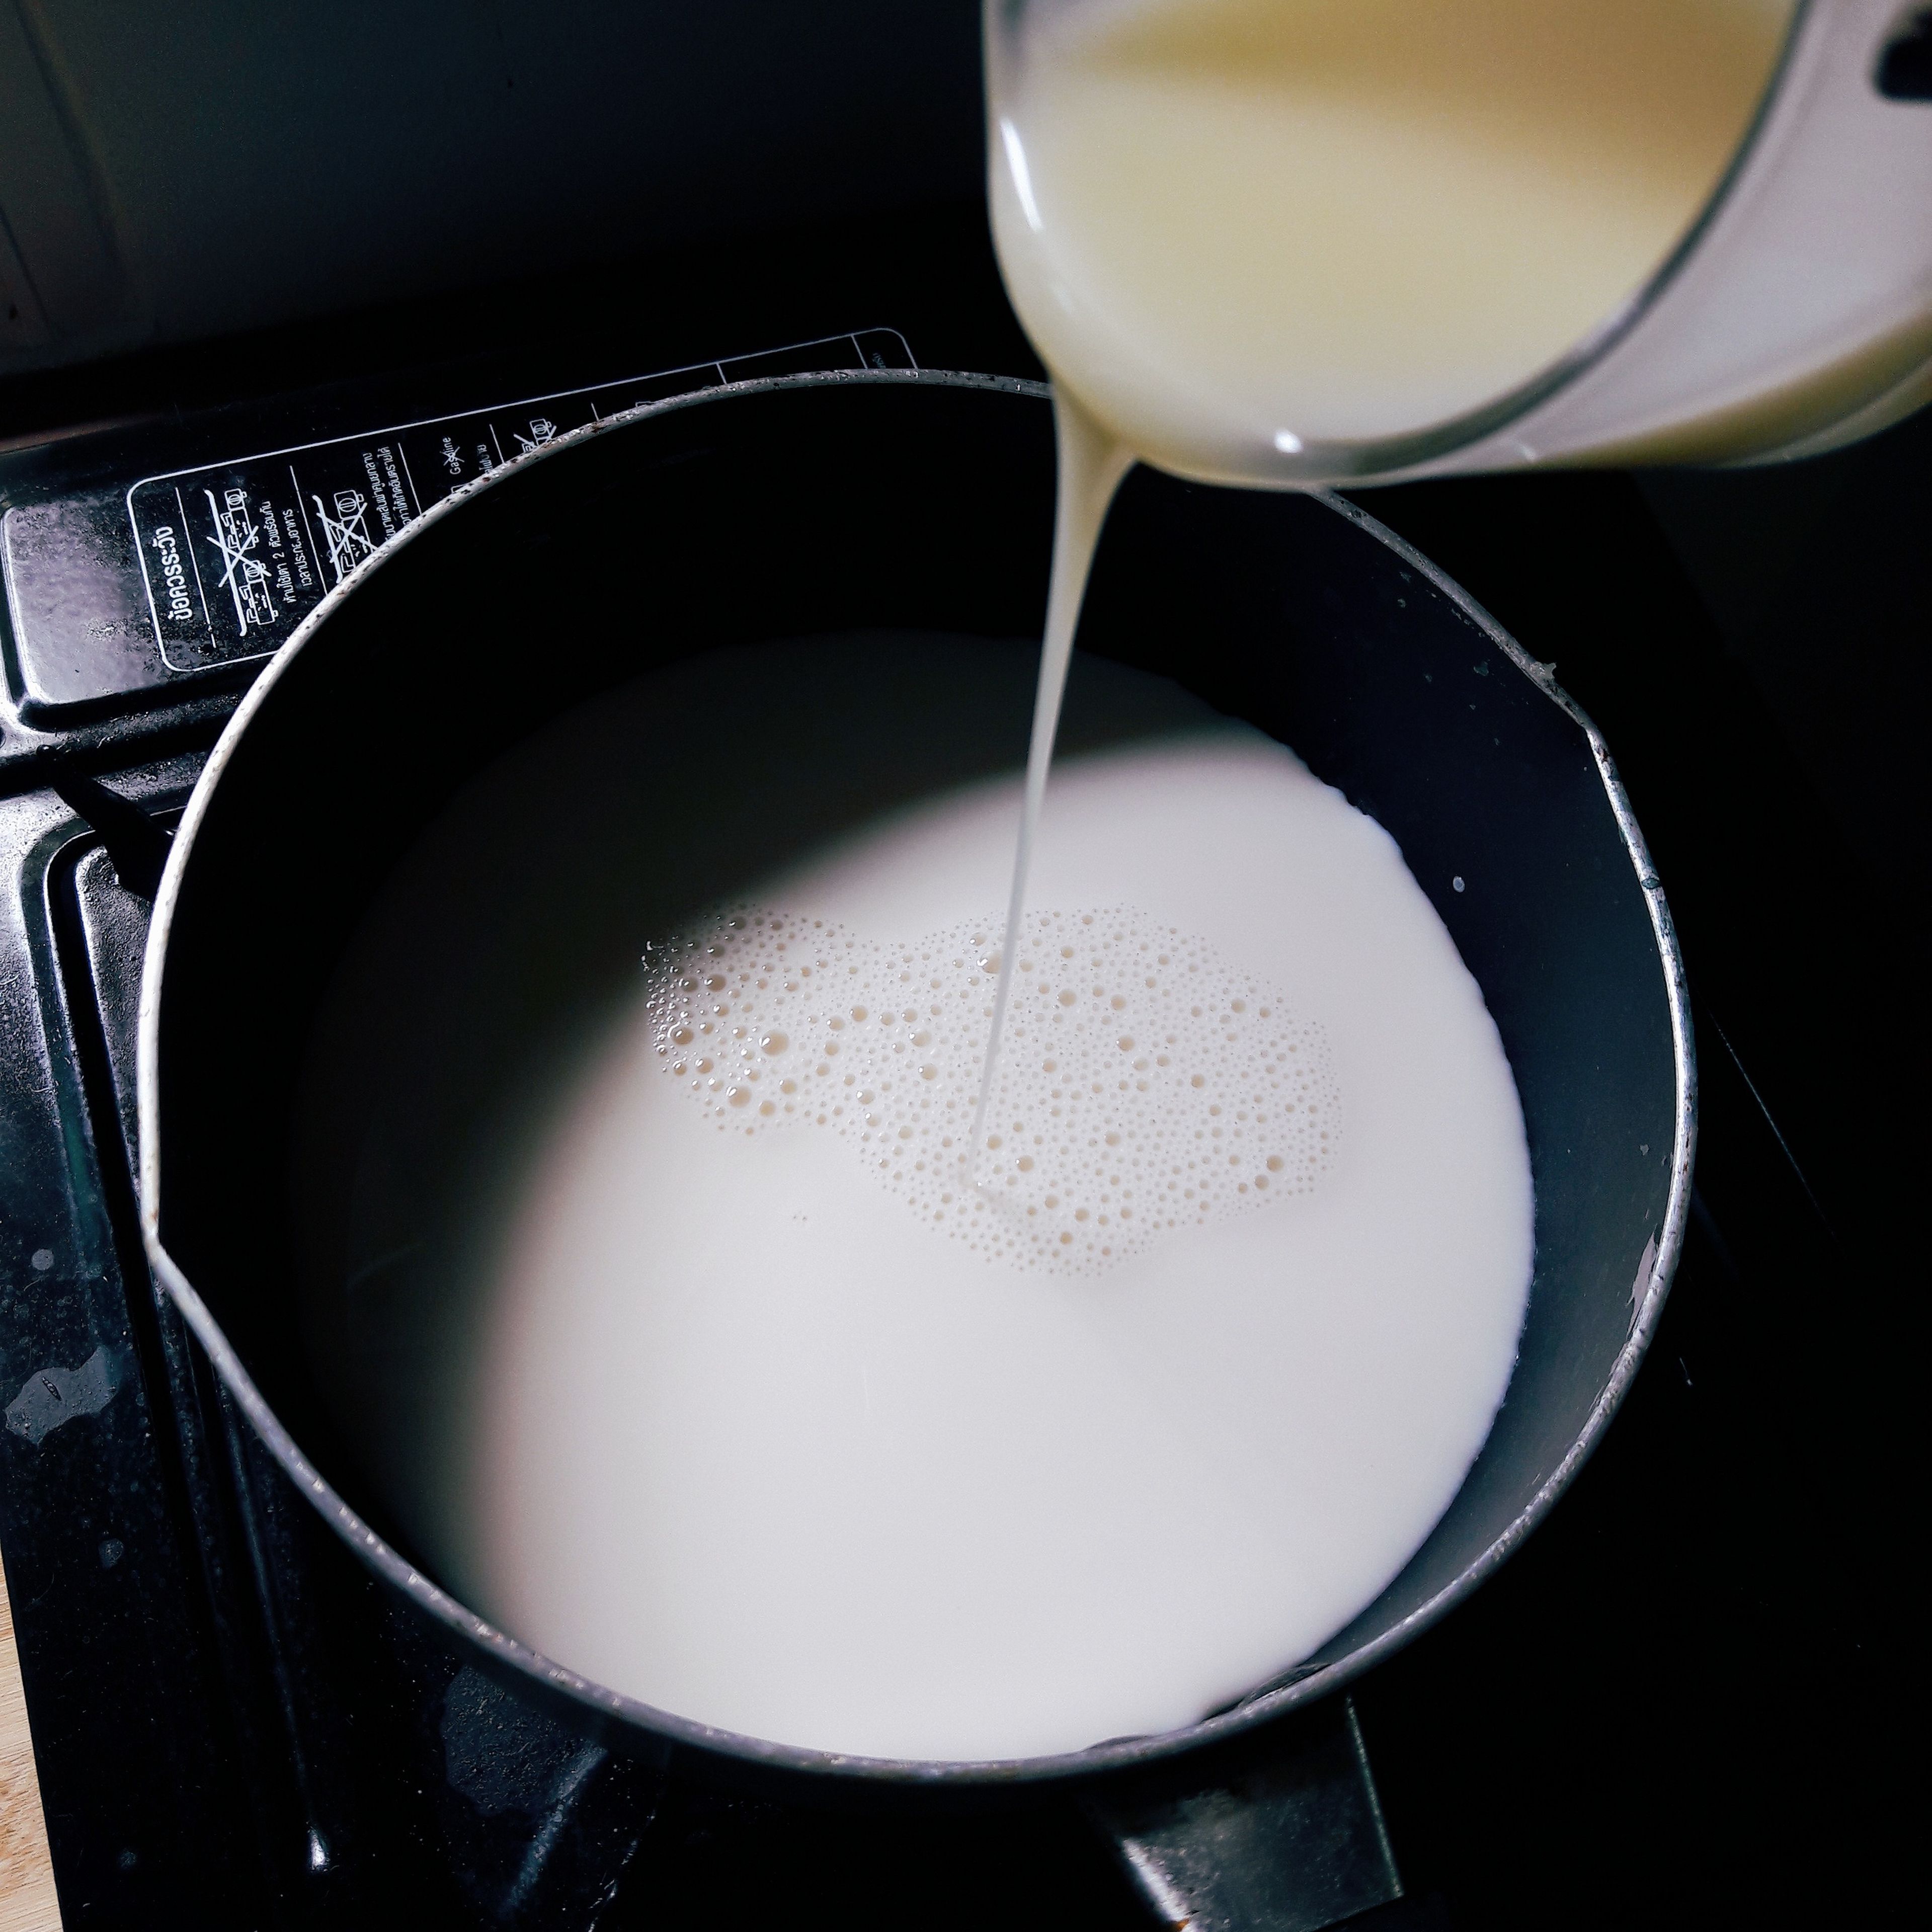 Warm the milk in a pot, add the condensed milk and stir well for 30 seconds. Set aside to cool down.